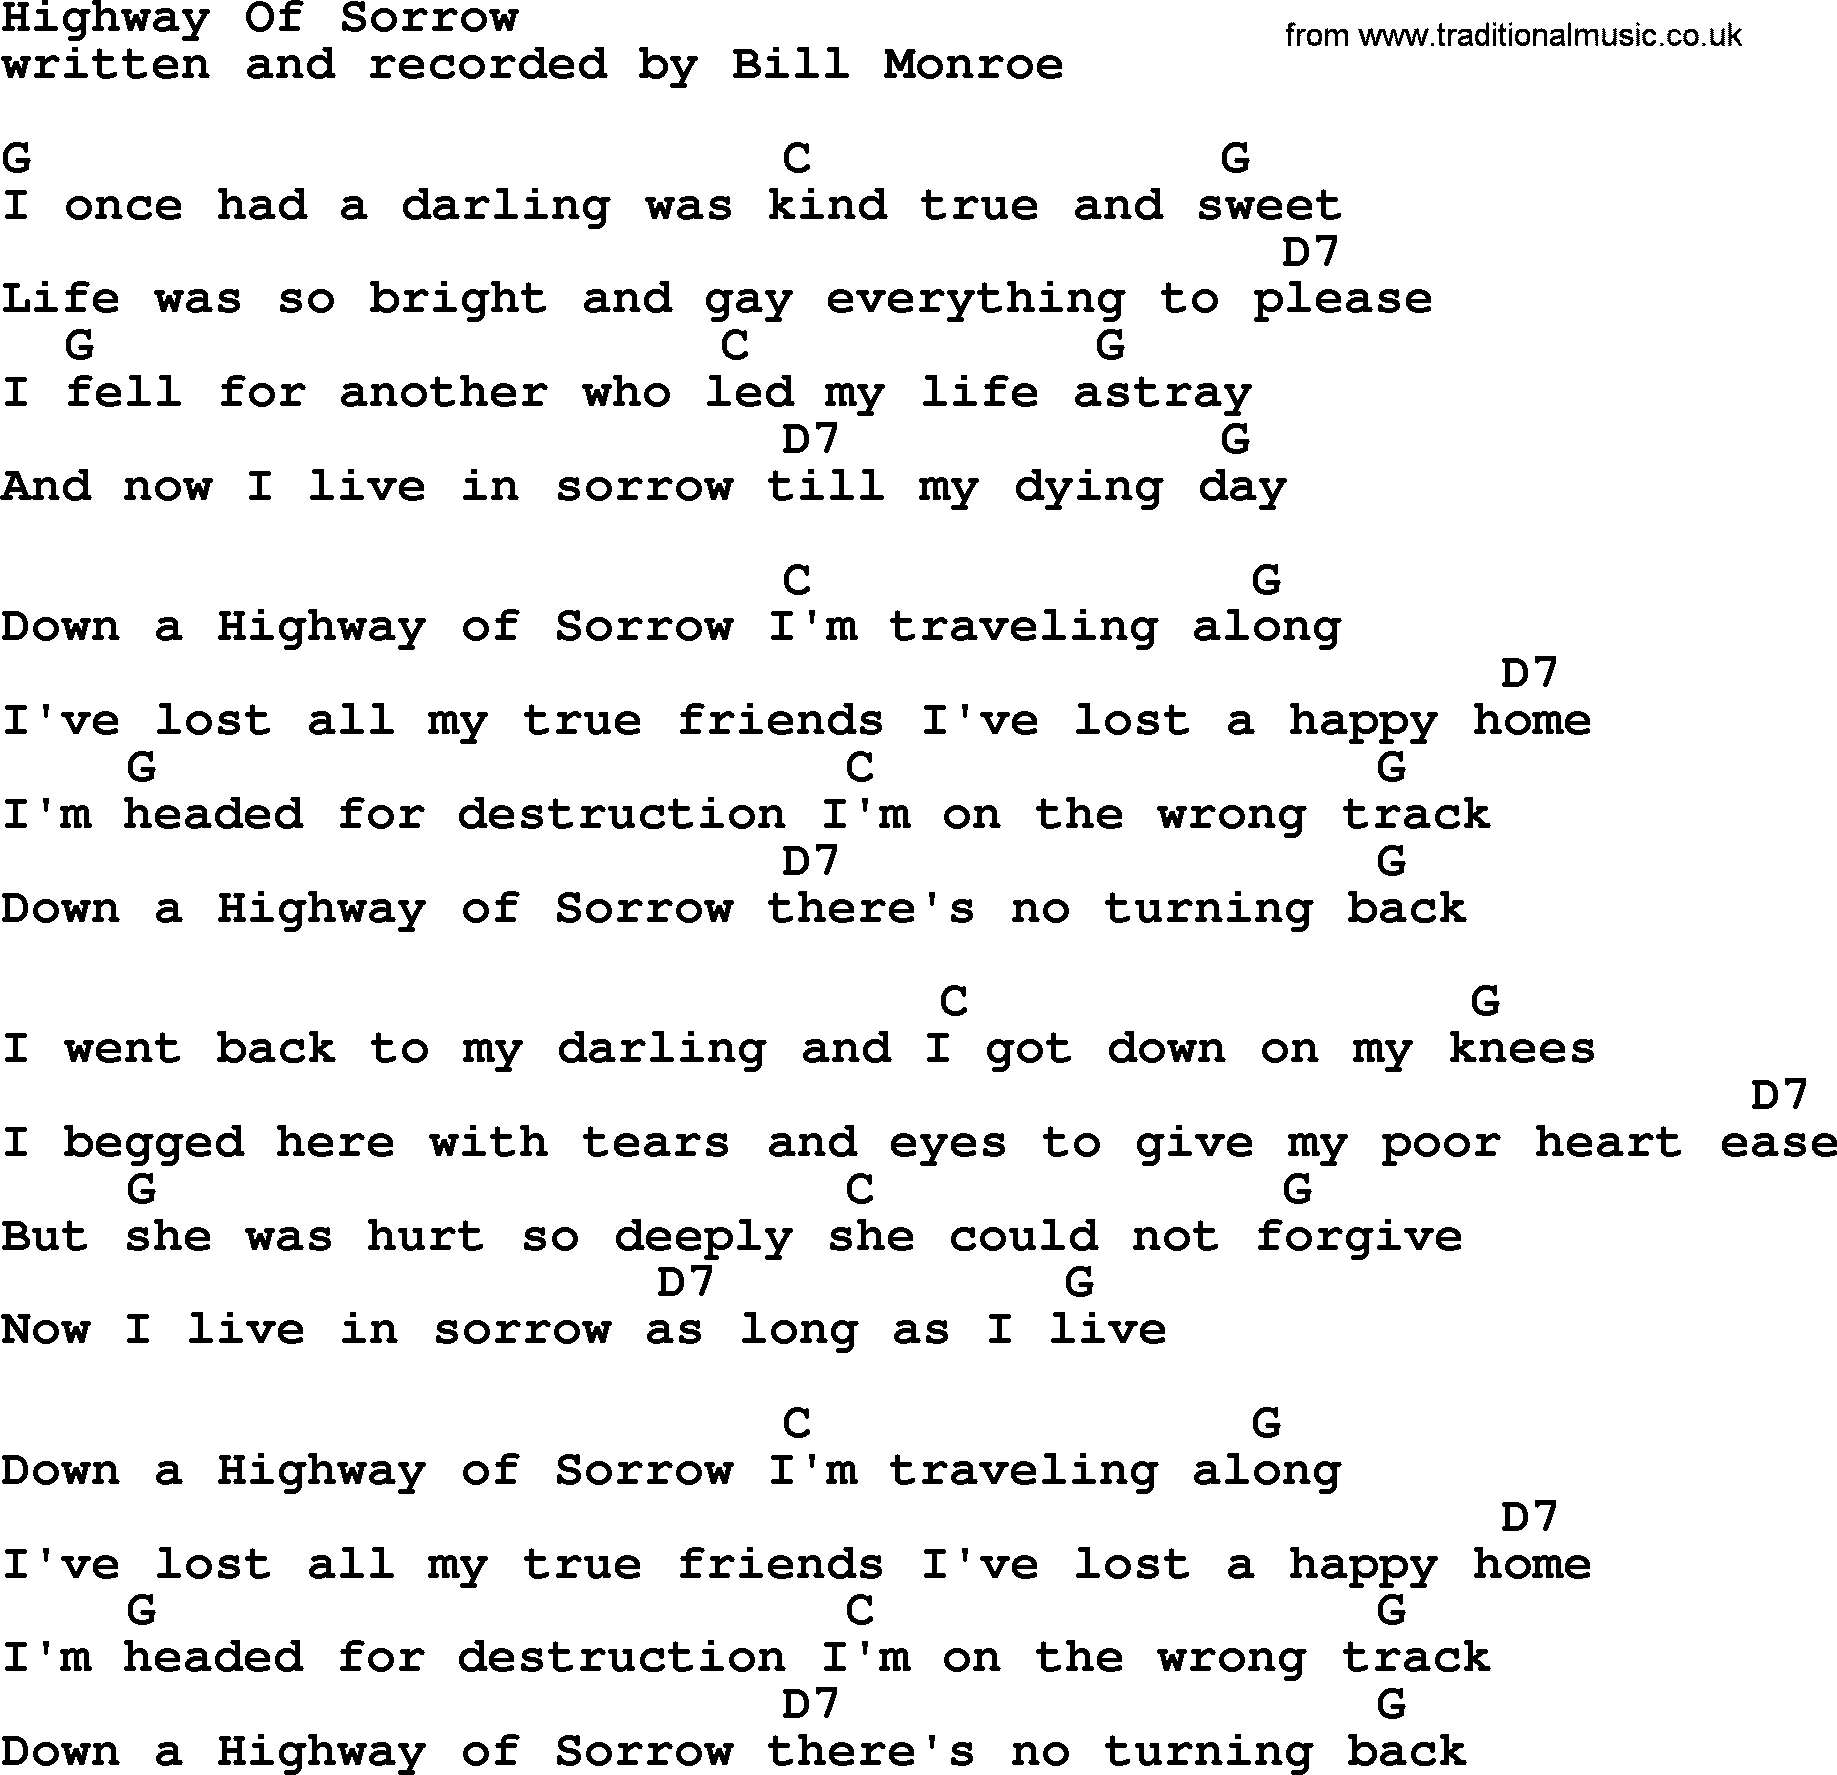 Bluegrass song: Highway Of Sorrow, lyrics and chords